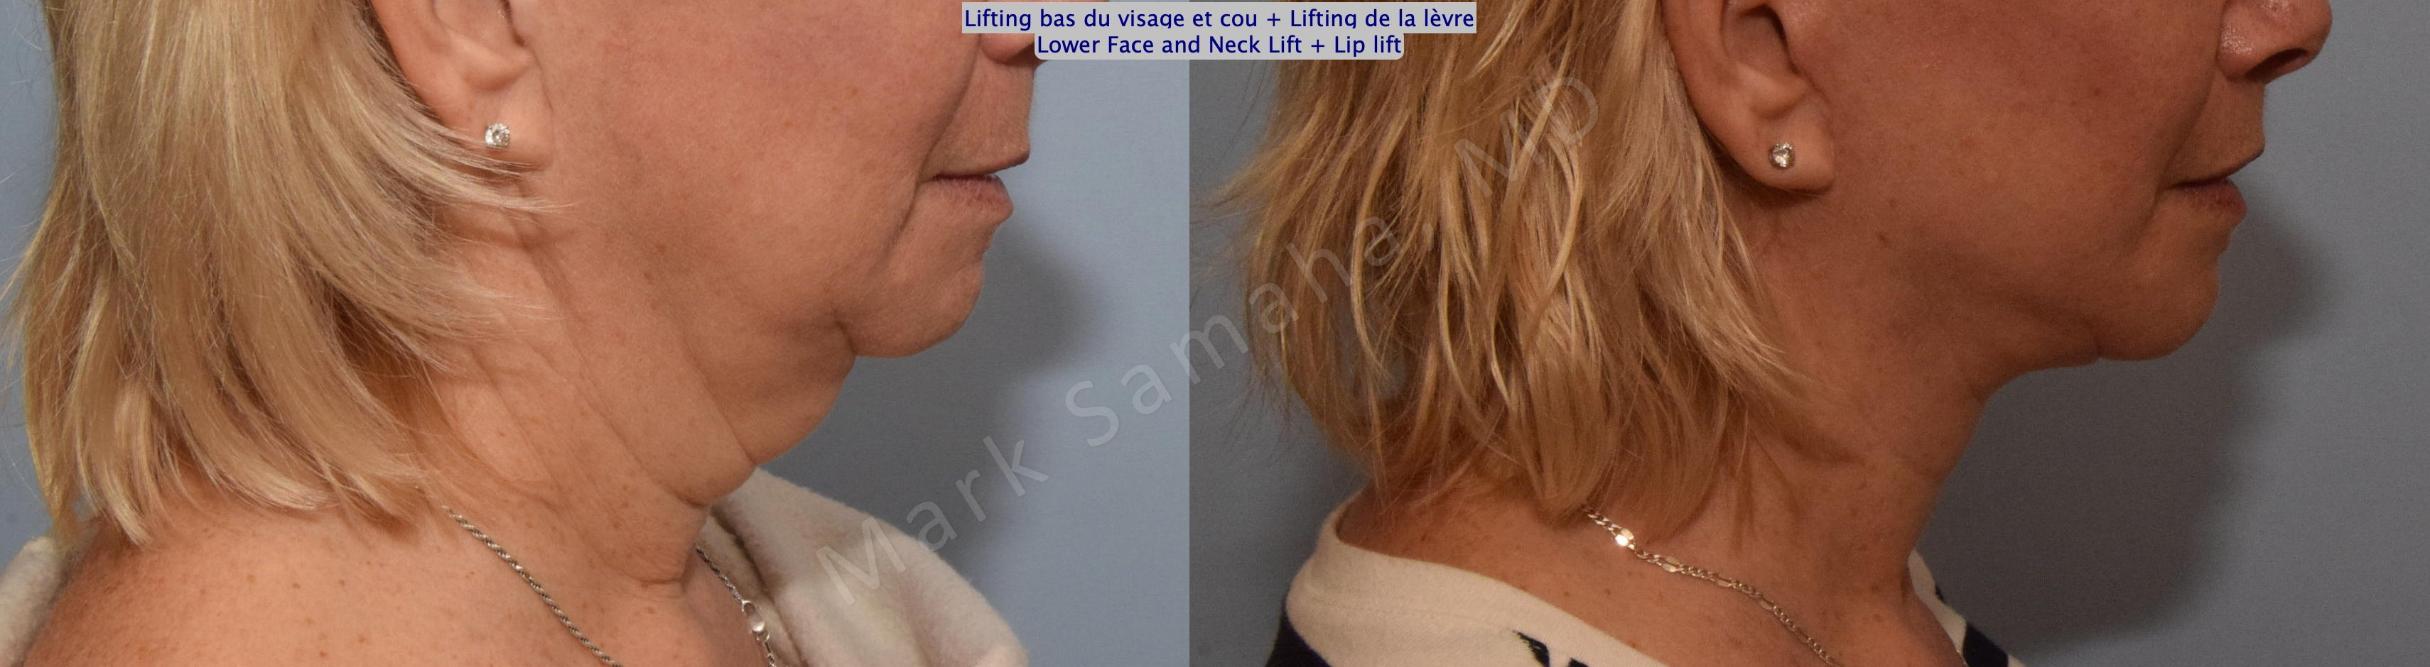 Before & After Lifting du visage / Cou - Facelift / Necklift Case 158 Right Side View in Mount Royal, QC